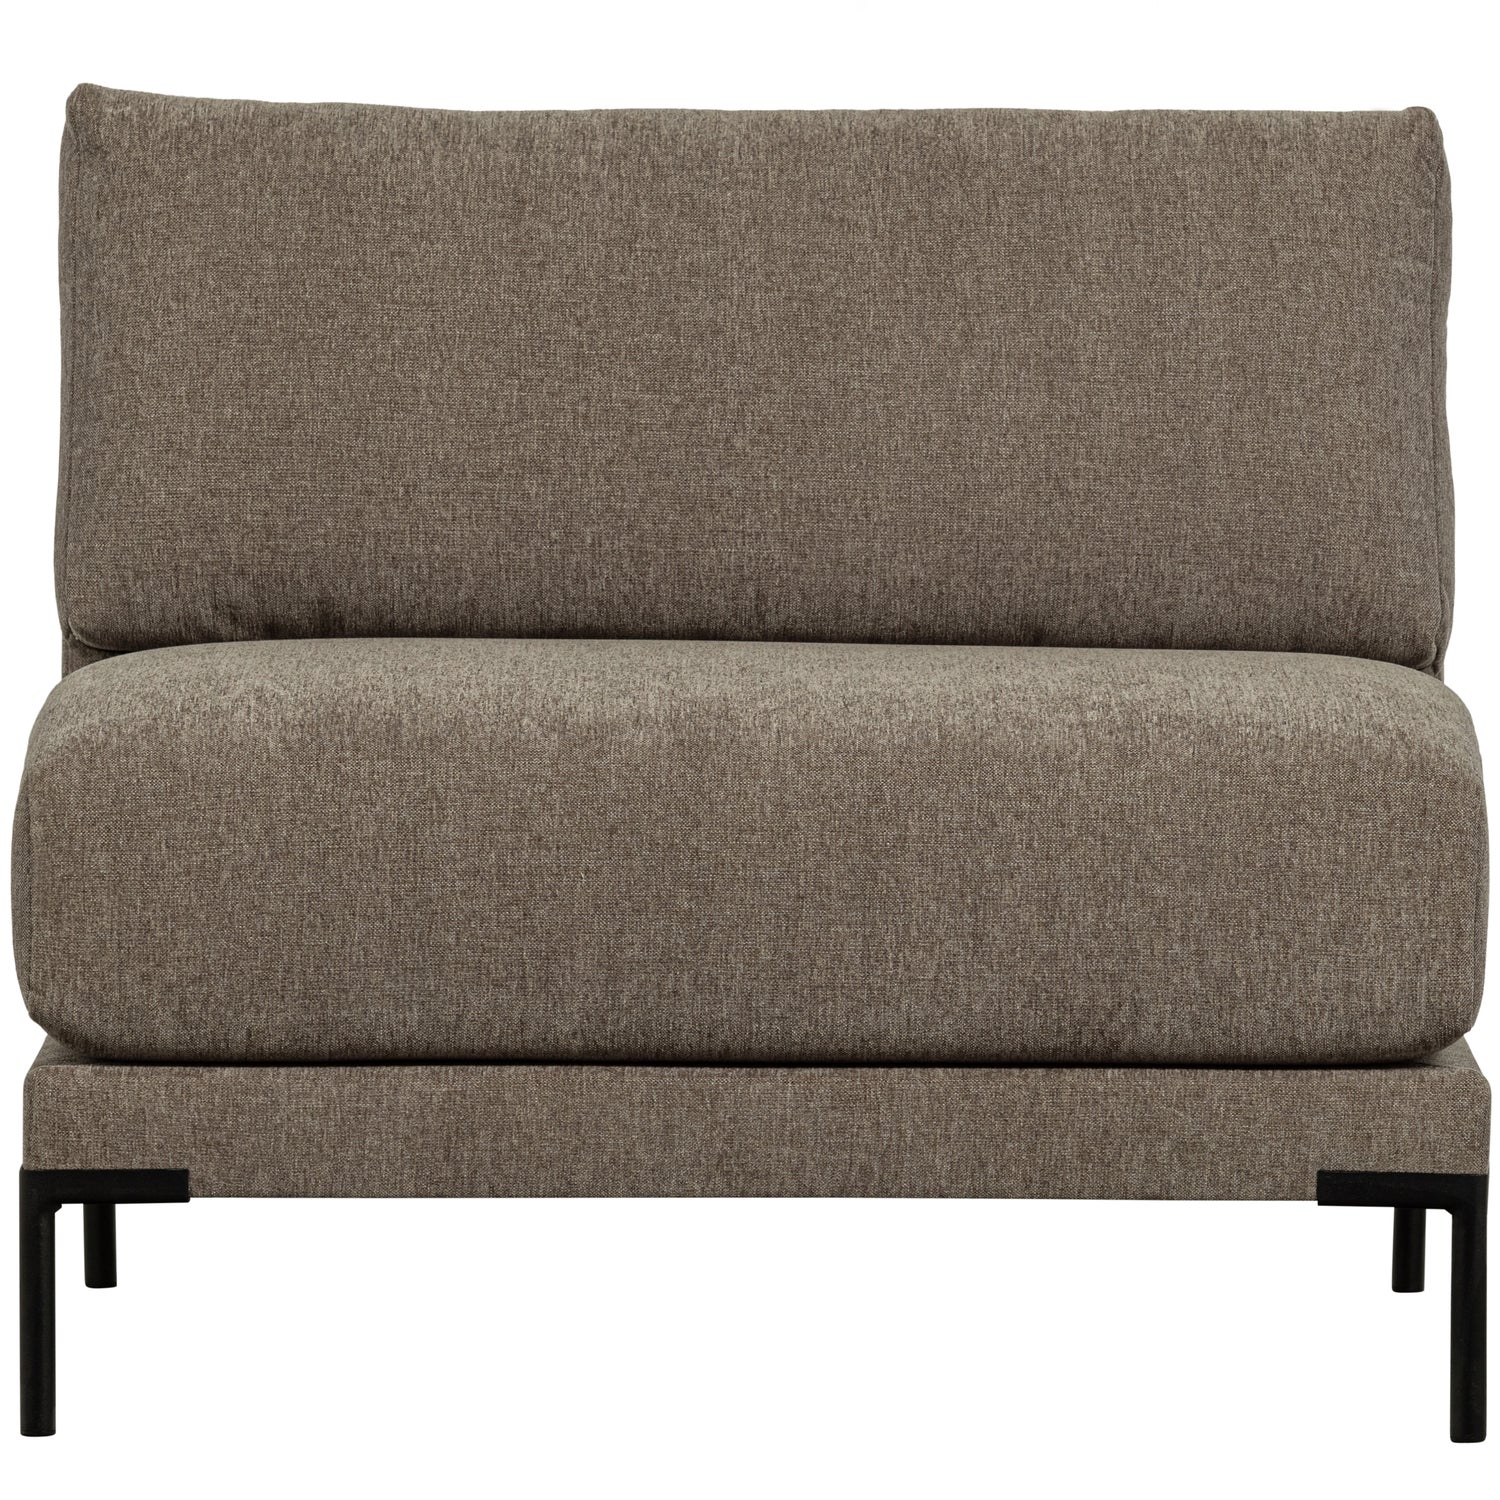 400486-T-01_VS_VT_Couple_loveseat_taupe.jpg?auto=webp&format=png&width=1500&height=1500